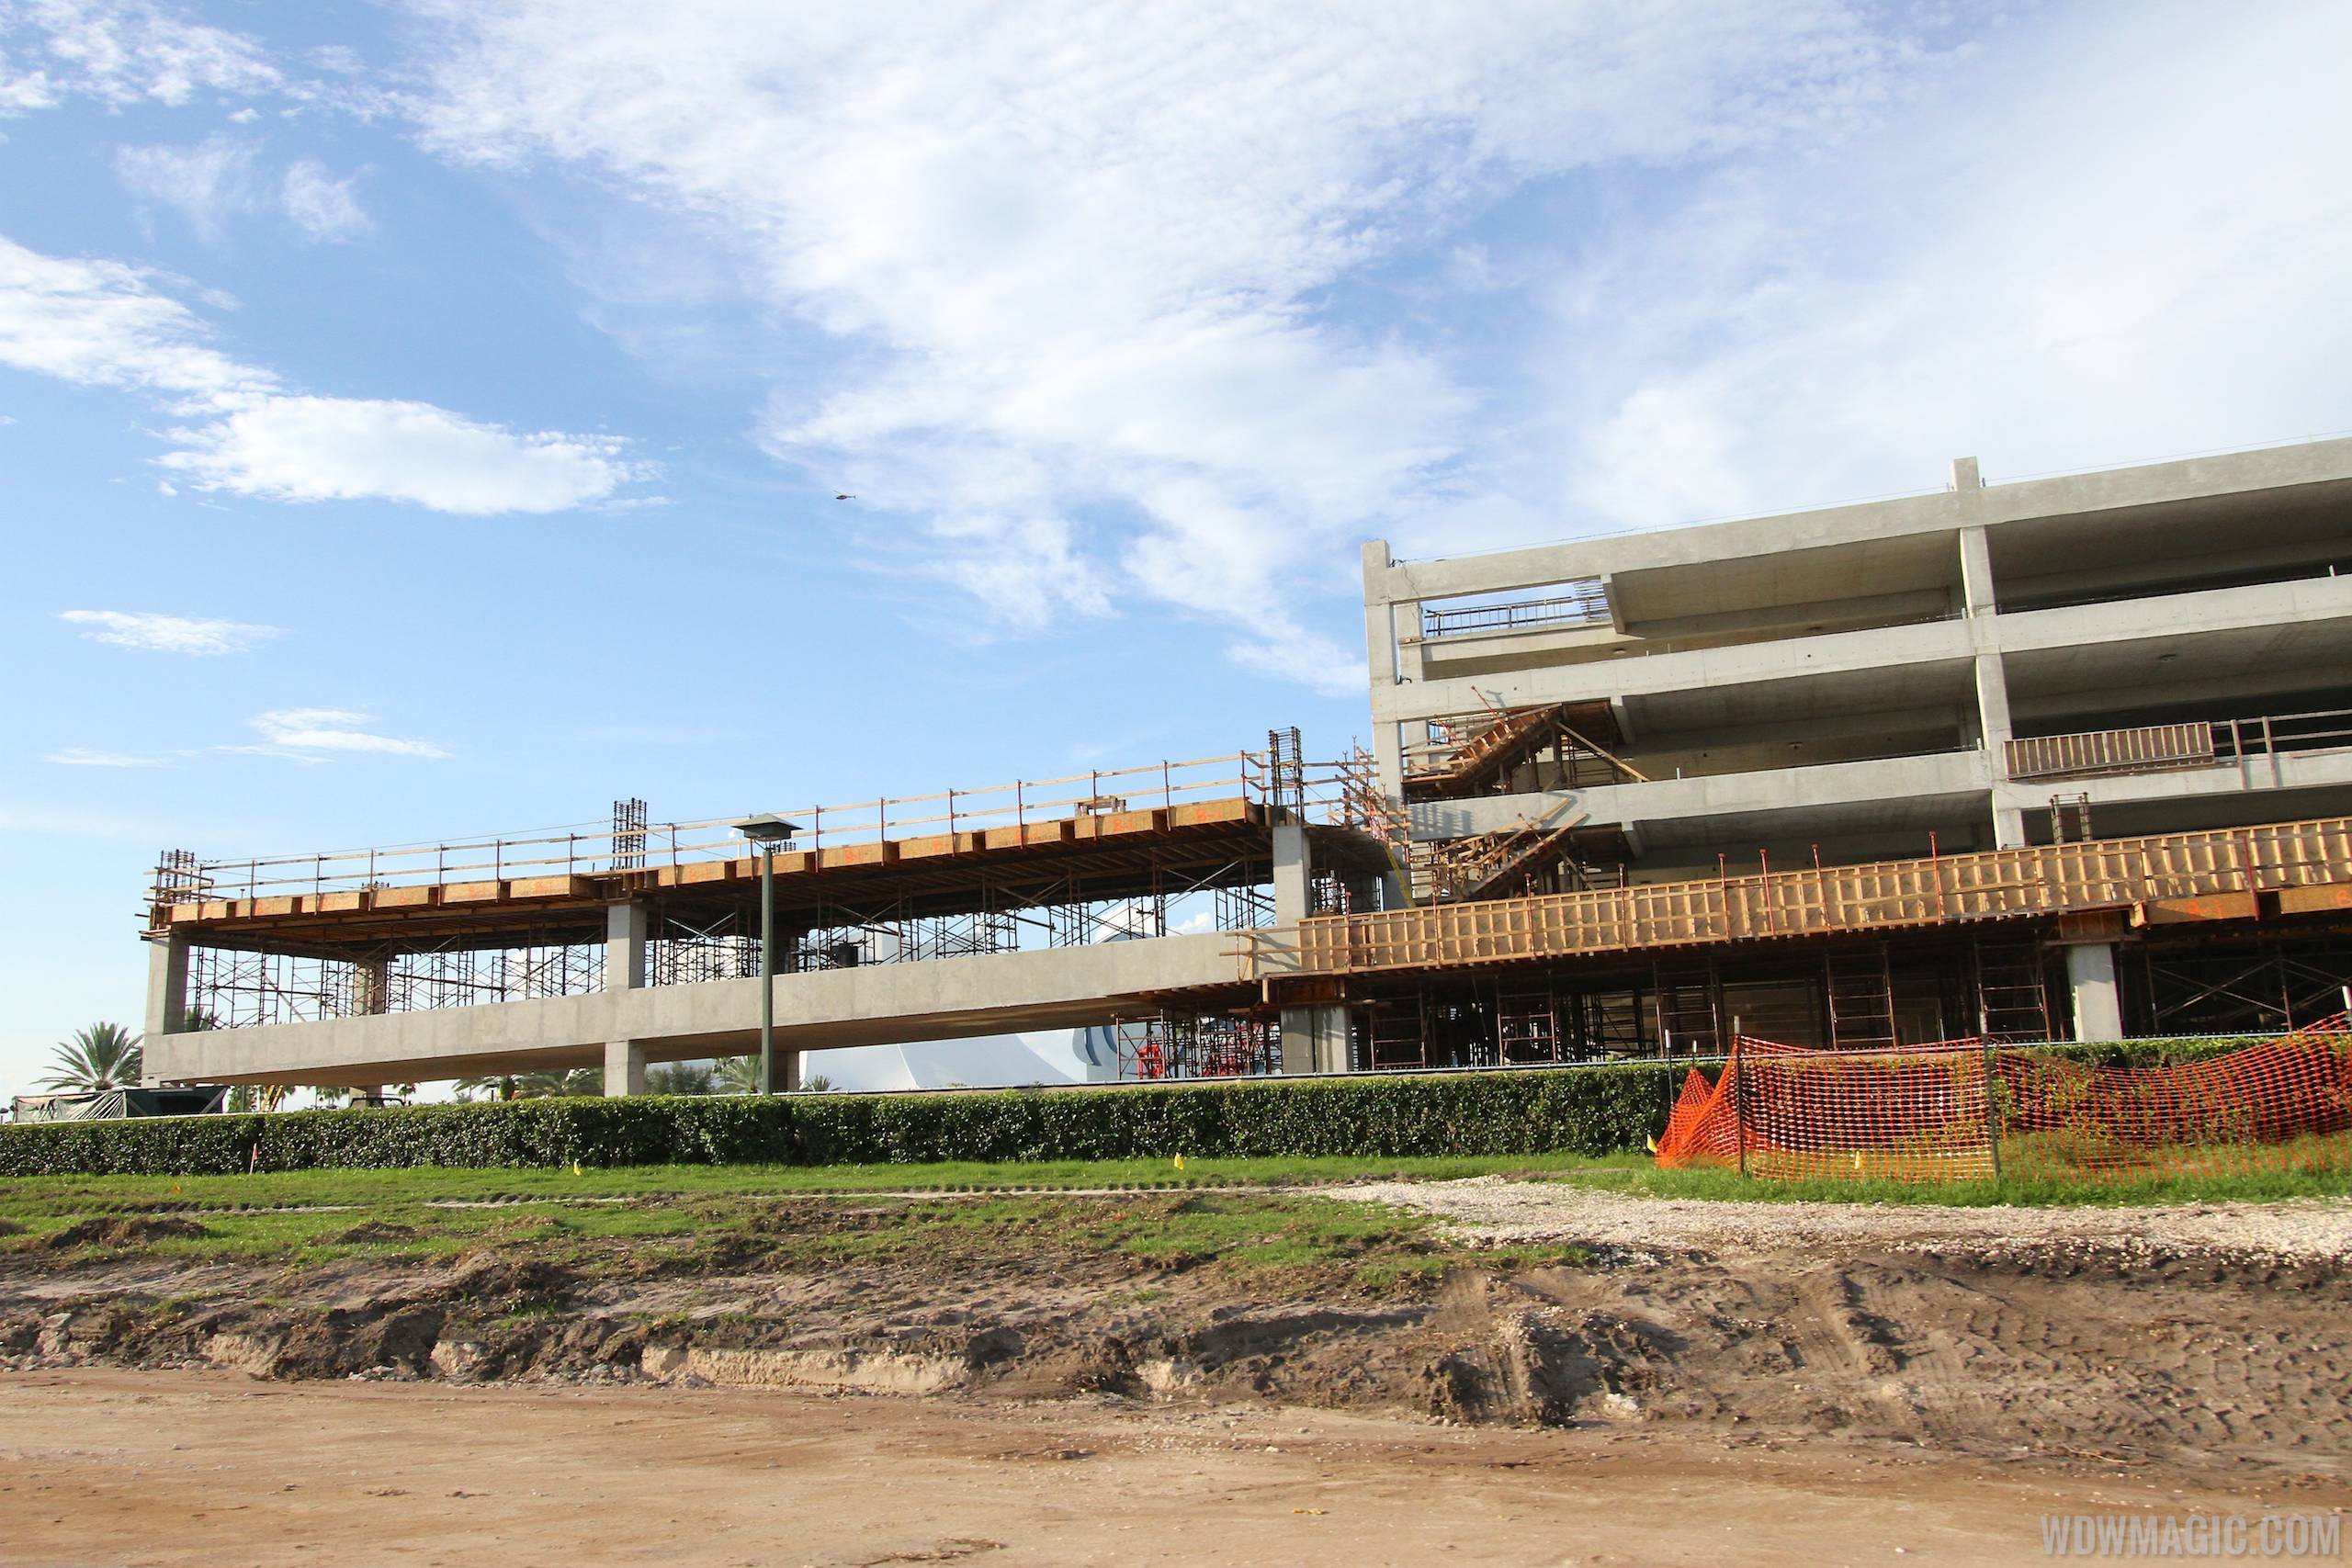 PHOTOS - View of the Disney Springs West Side parking garage from Buena Vista Drive